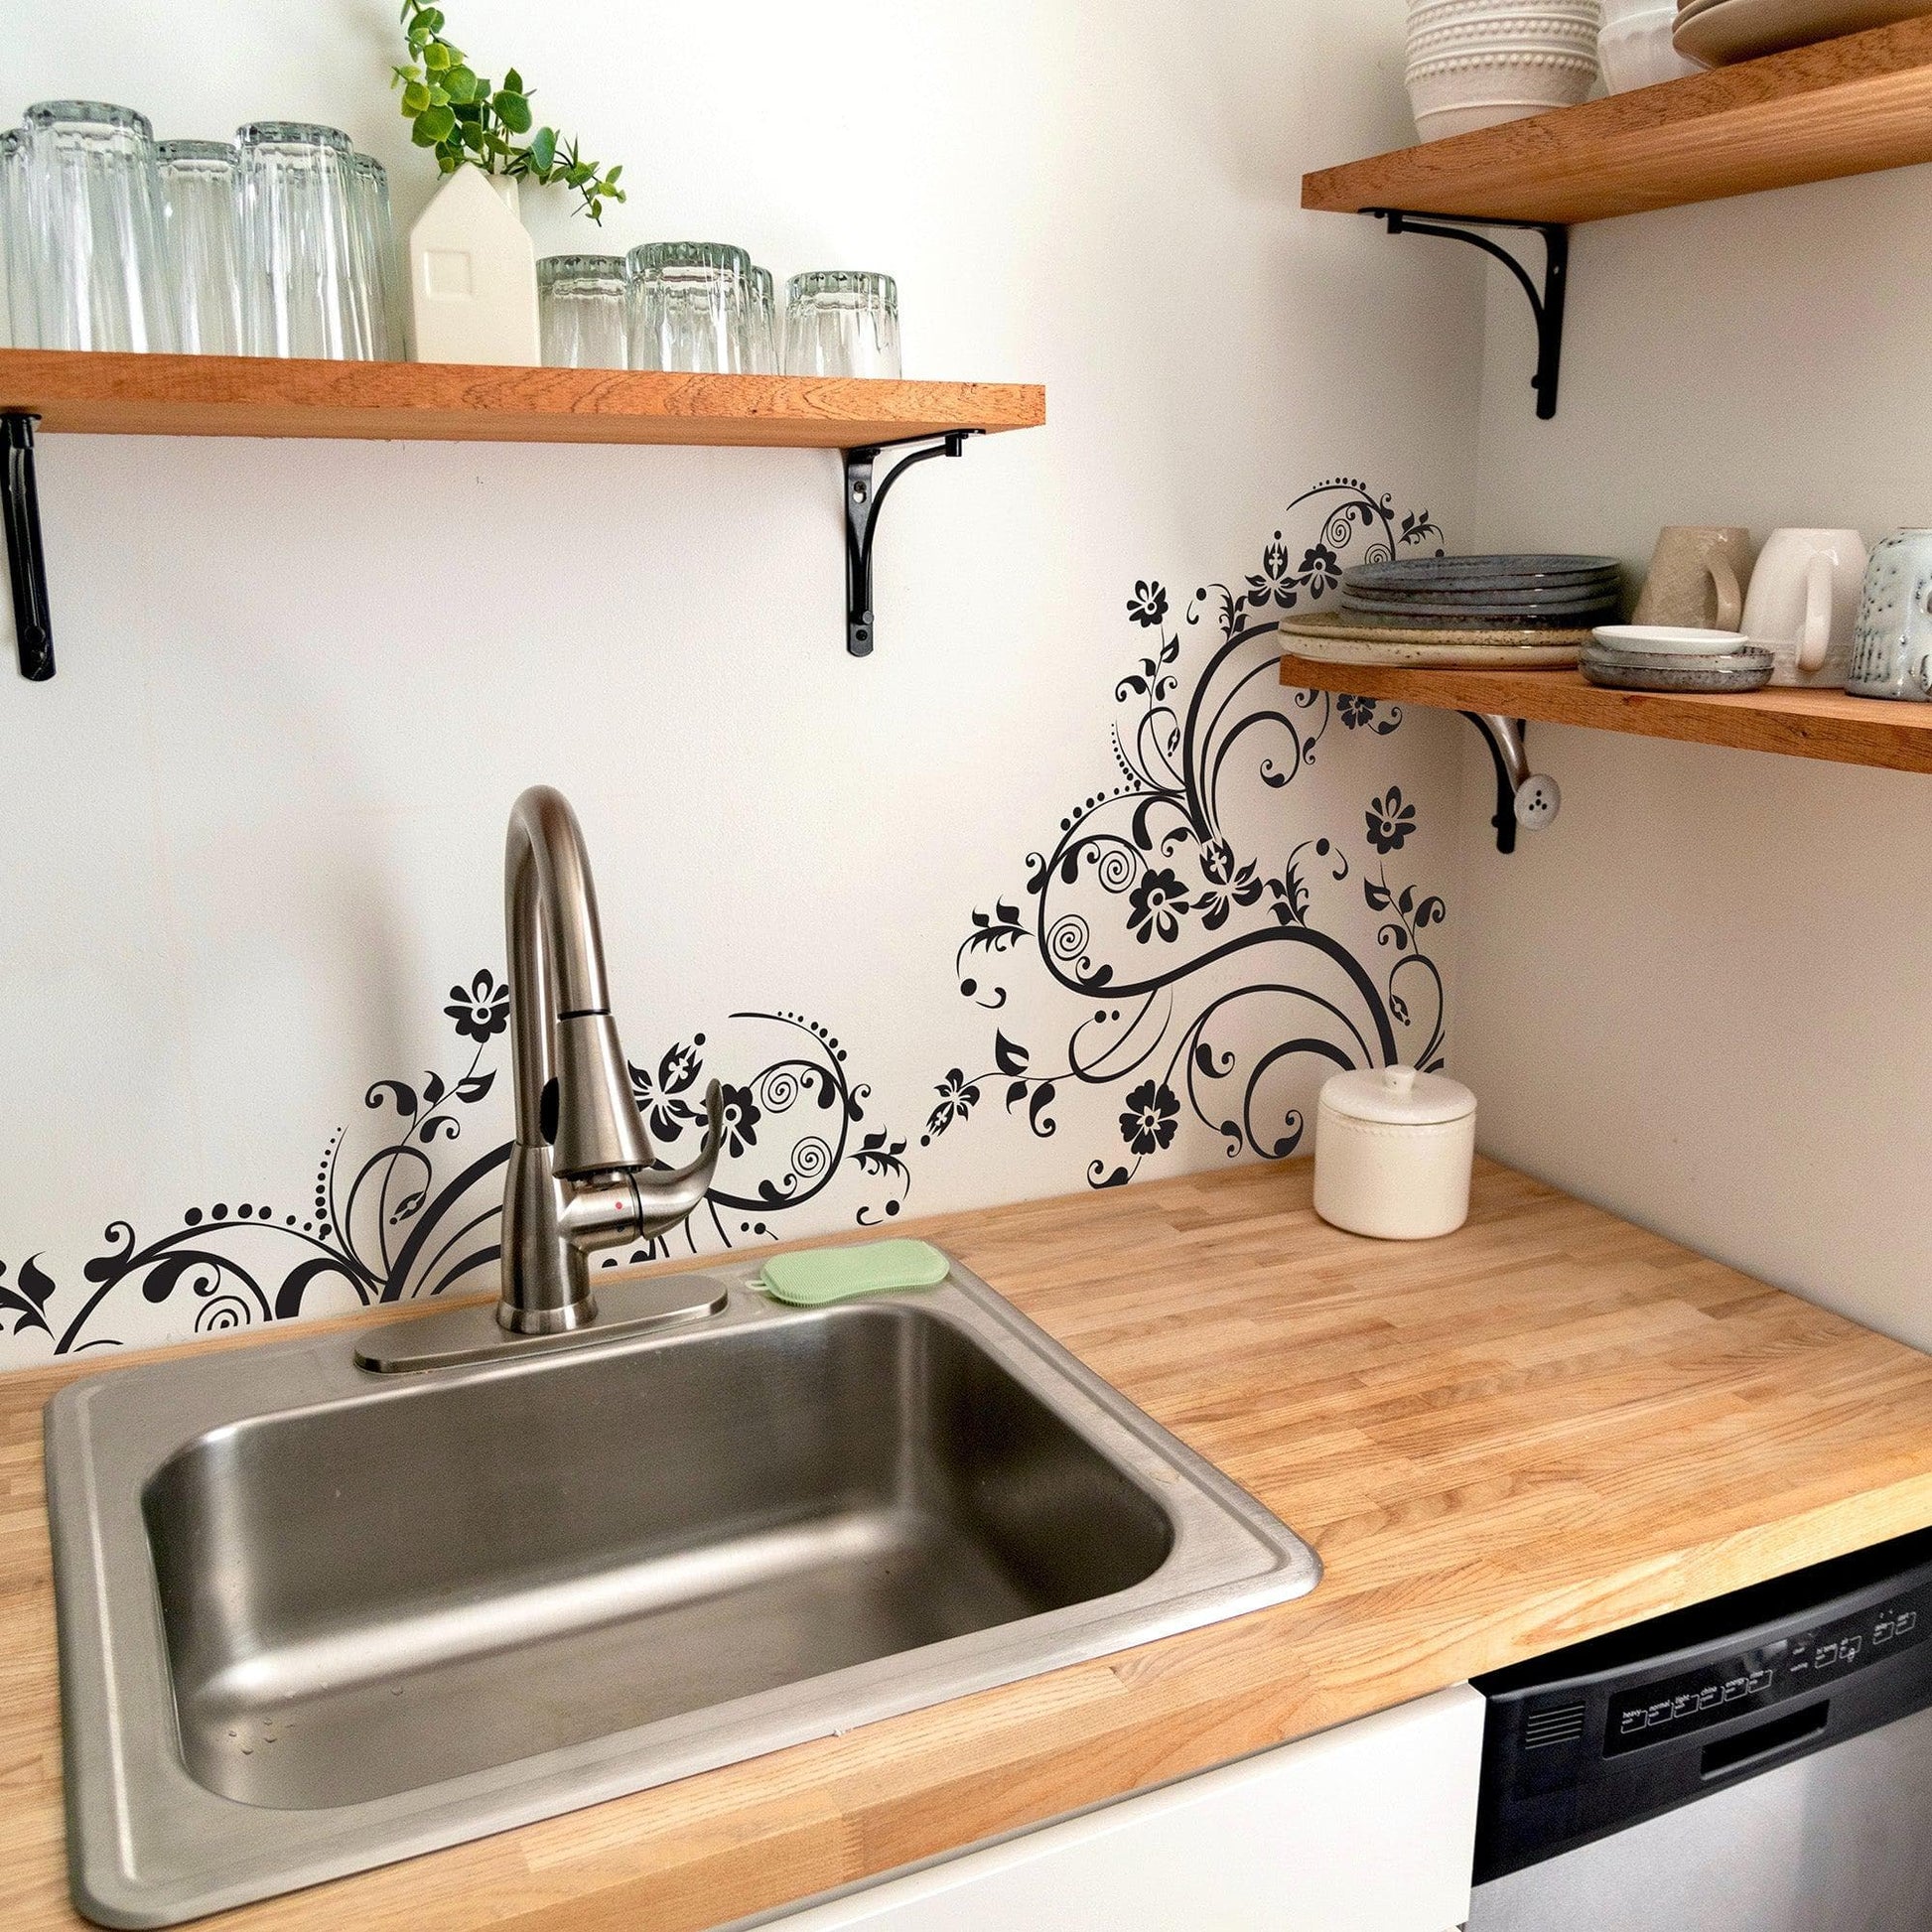 Black swirling floral decals on a white wall in a kitchen.